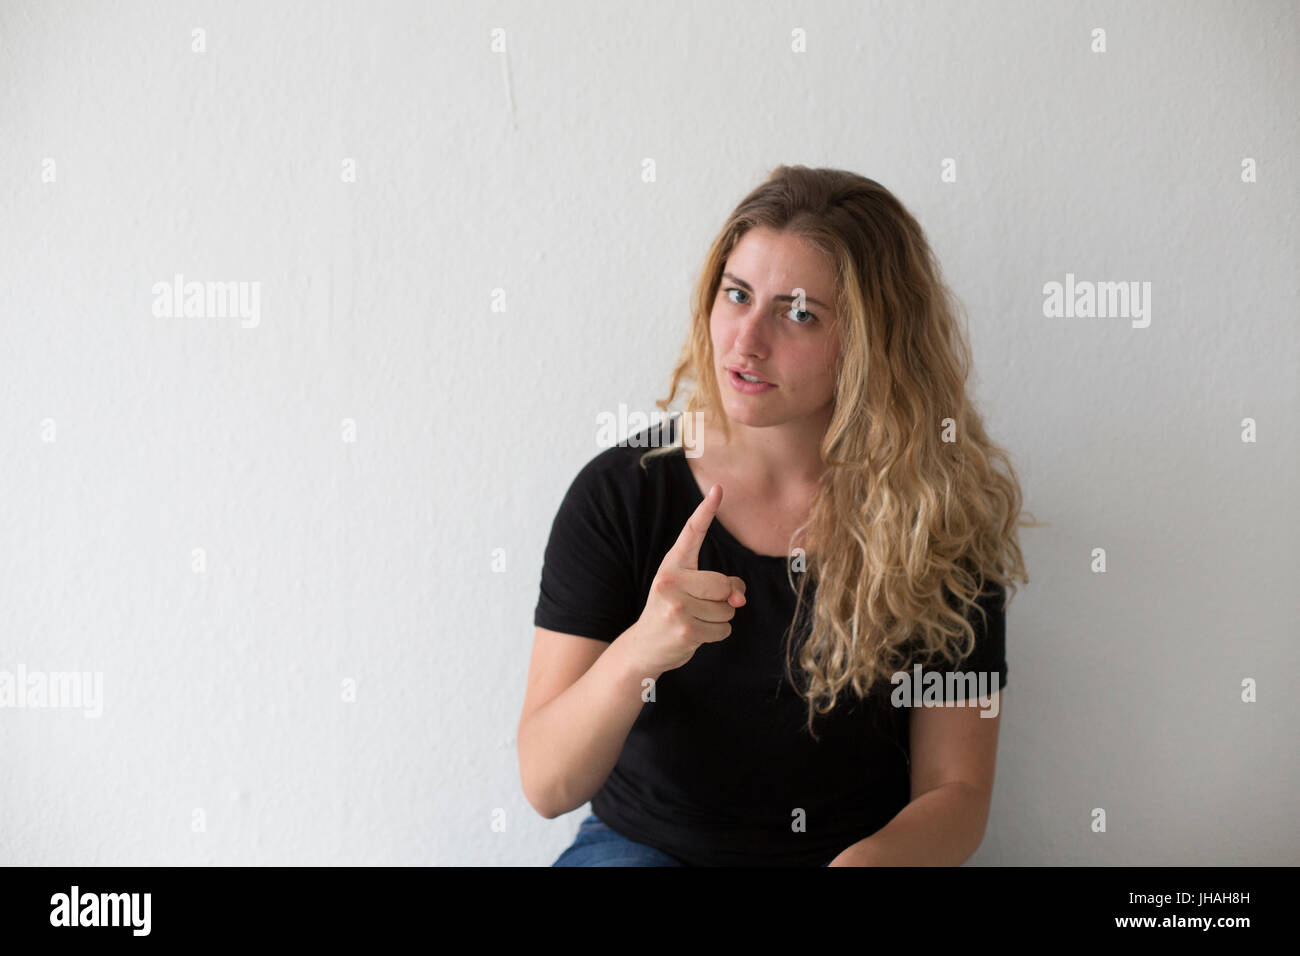 Young, blonde, caucasian woman expresses negative emotion, anger, screaming and finger pointing at viewer and photographer on a white background. Stock Photo